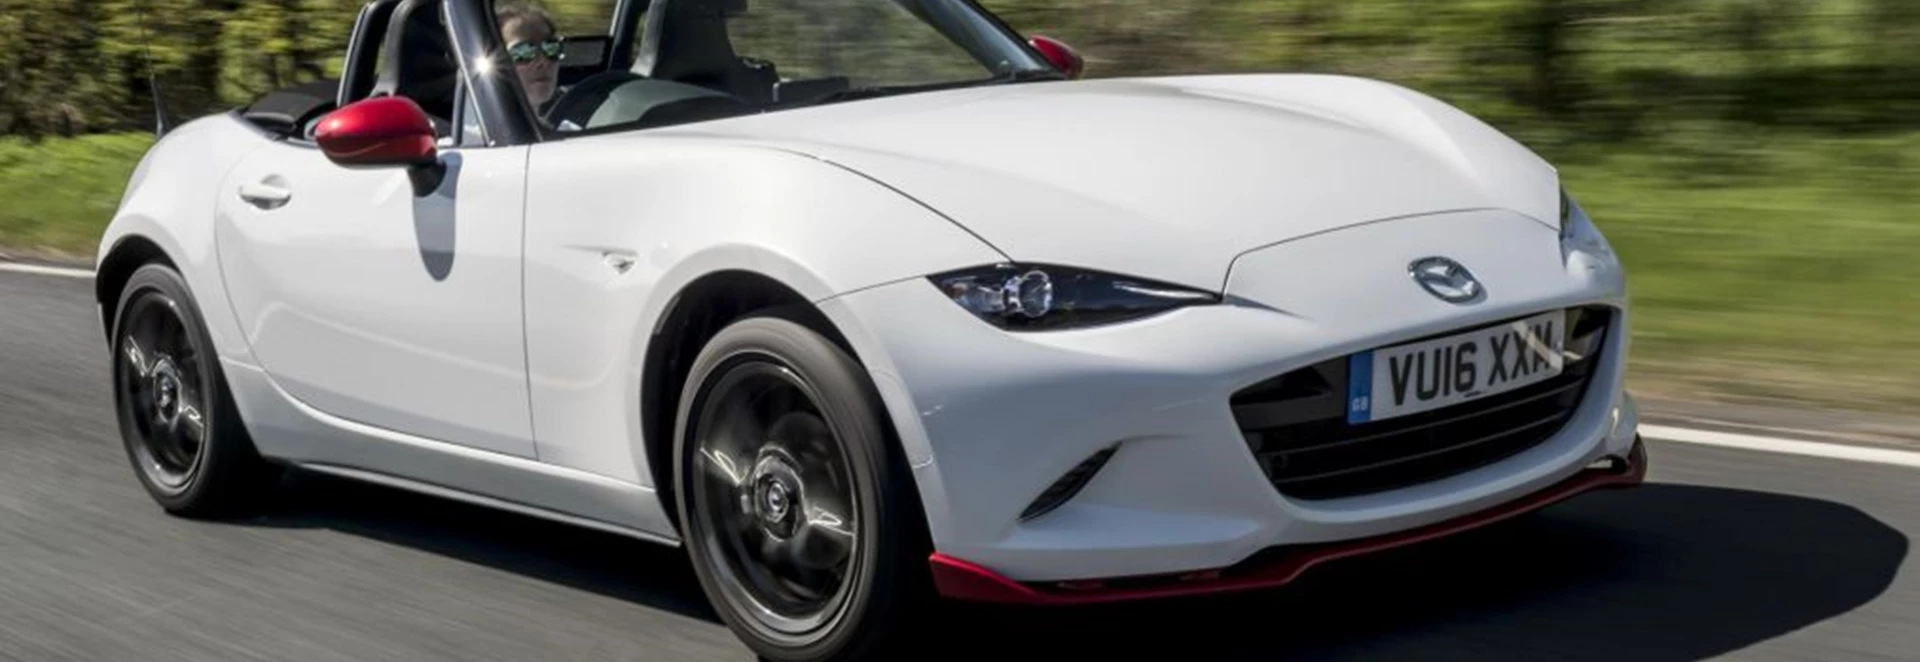 Feast your eyes on the limited edition Mazda MX-5 Icon